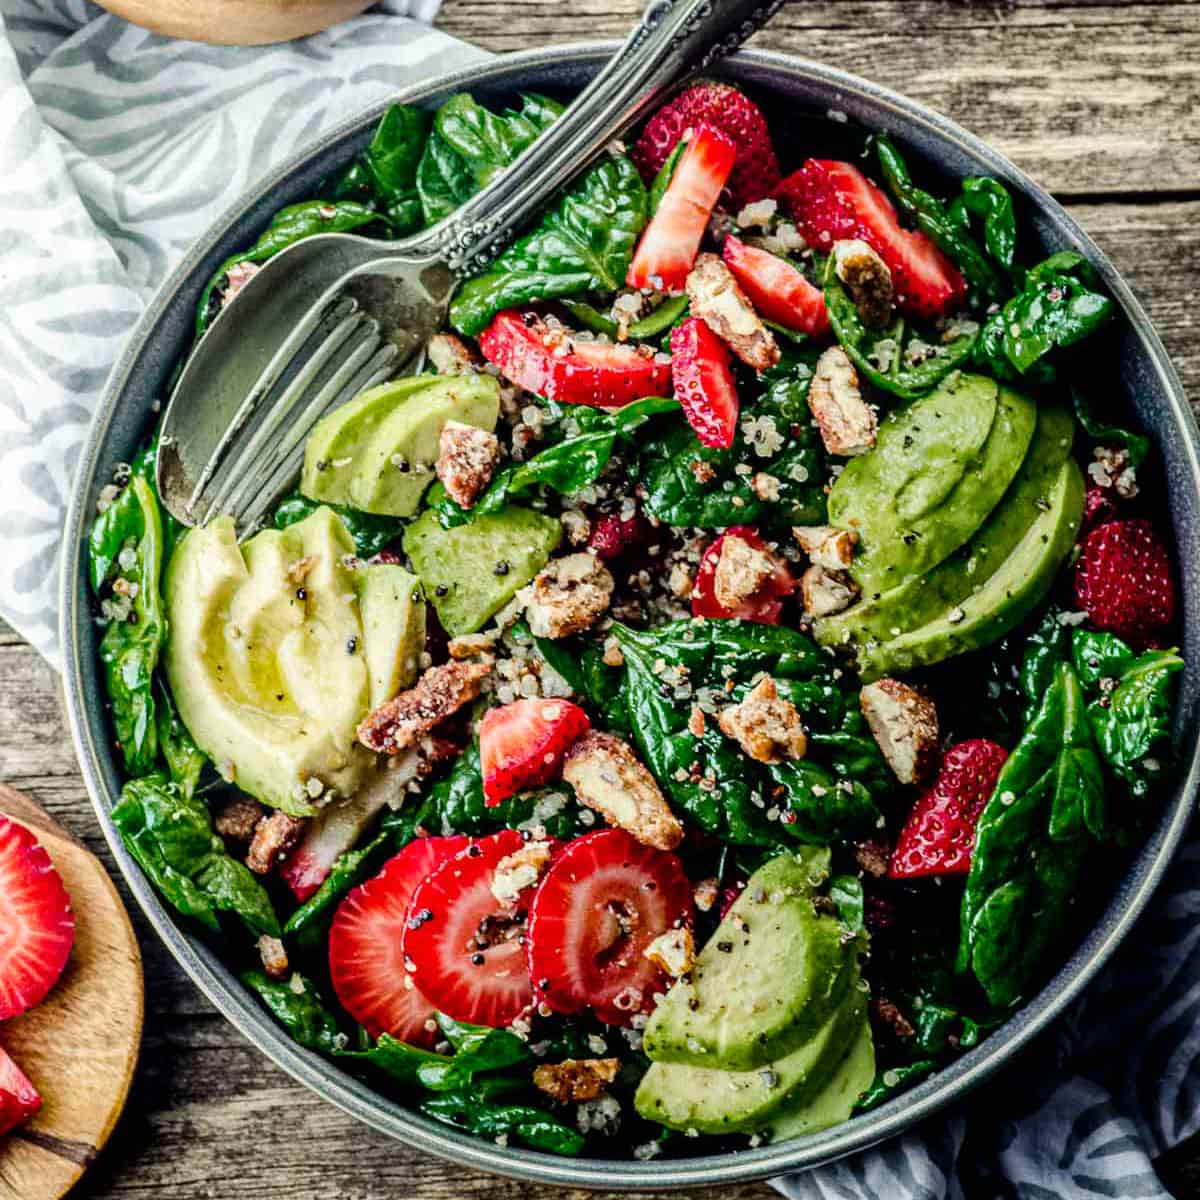 bird's eye view of a plate of spinach salad with strawberries, avocado, and candied pecans